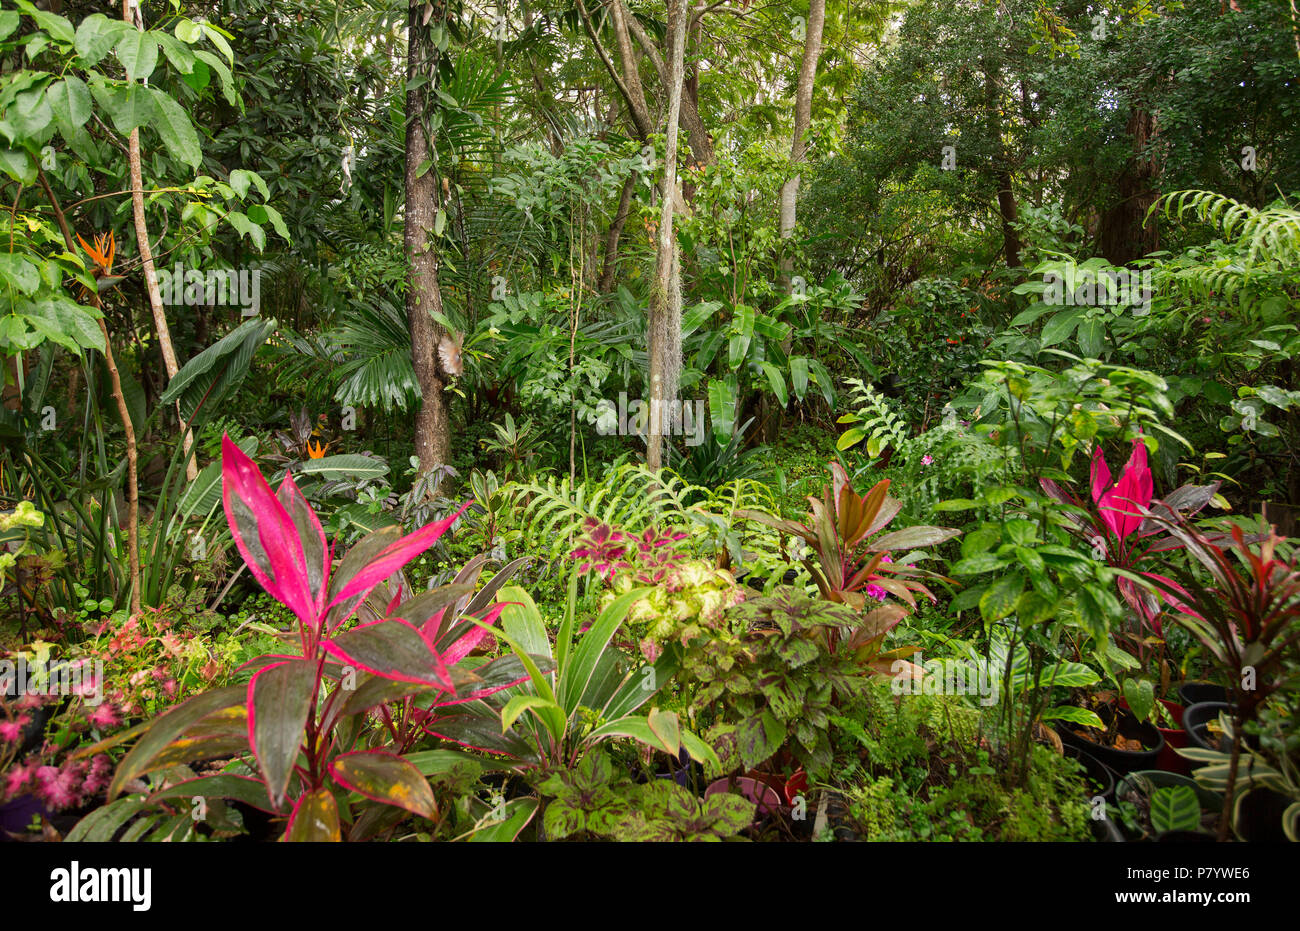 Sub-tropical rainforest garden with dense lush green foliage of trees, palms and ferns with vivid red leaves of cordylines in foreground IN Australia Stock Photo